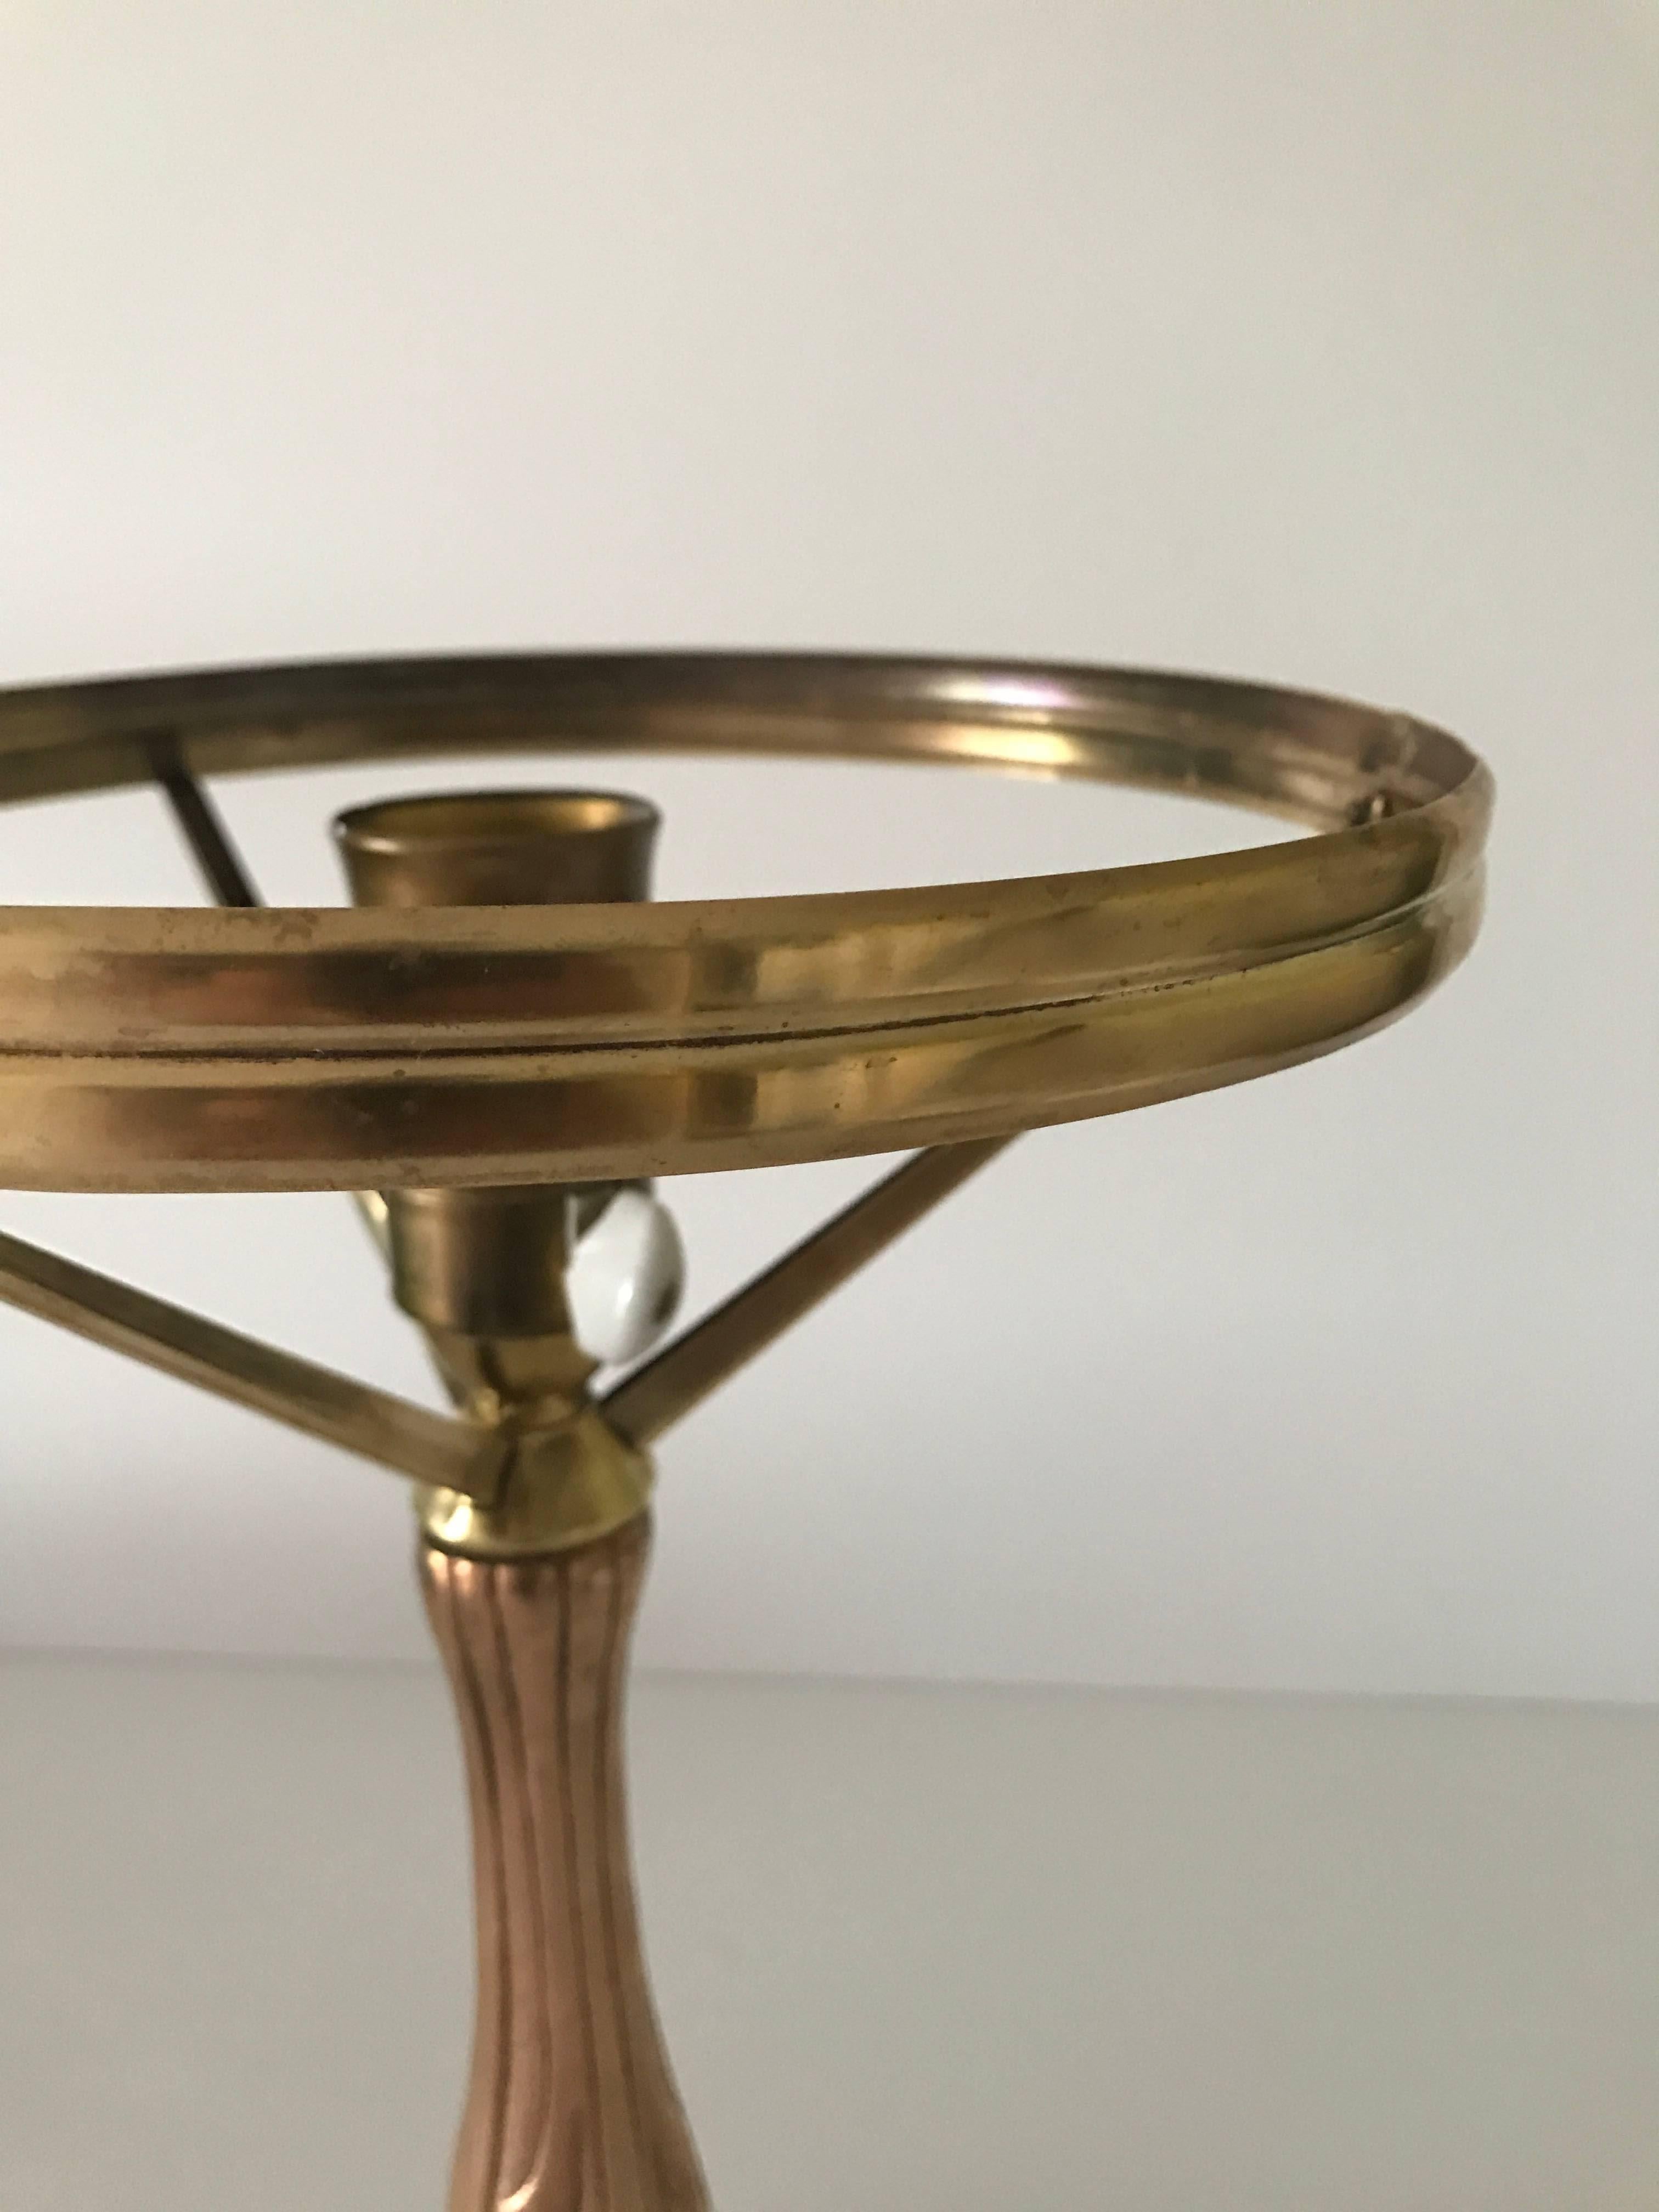 Early 20th Century 1925 Swedish Jugendstil, Art Nouveau Brass and Glass Table Lamp For Sale